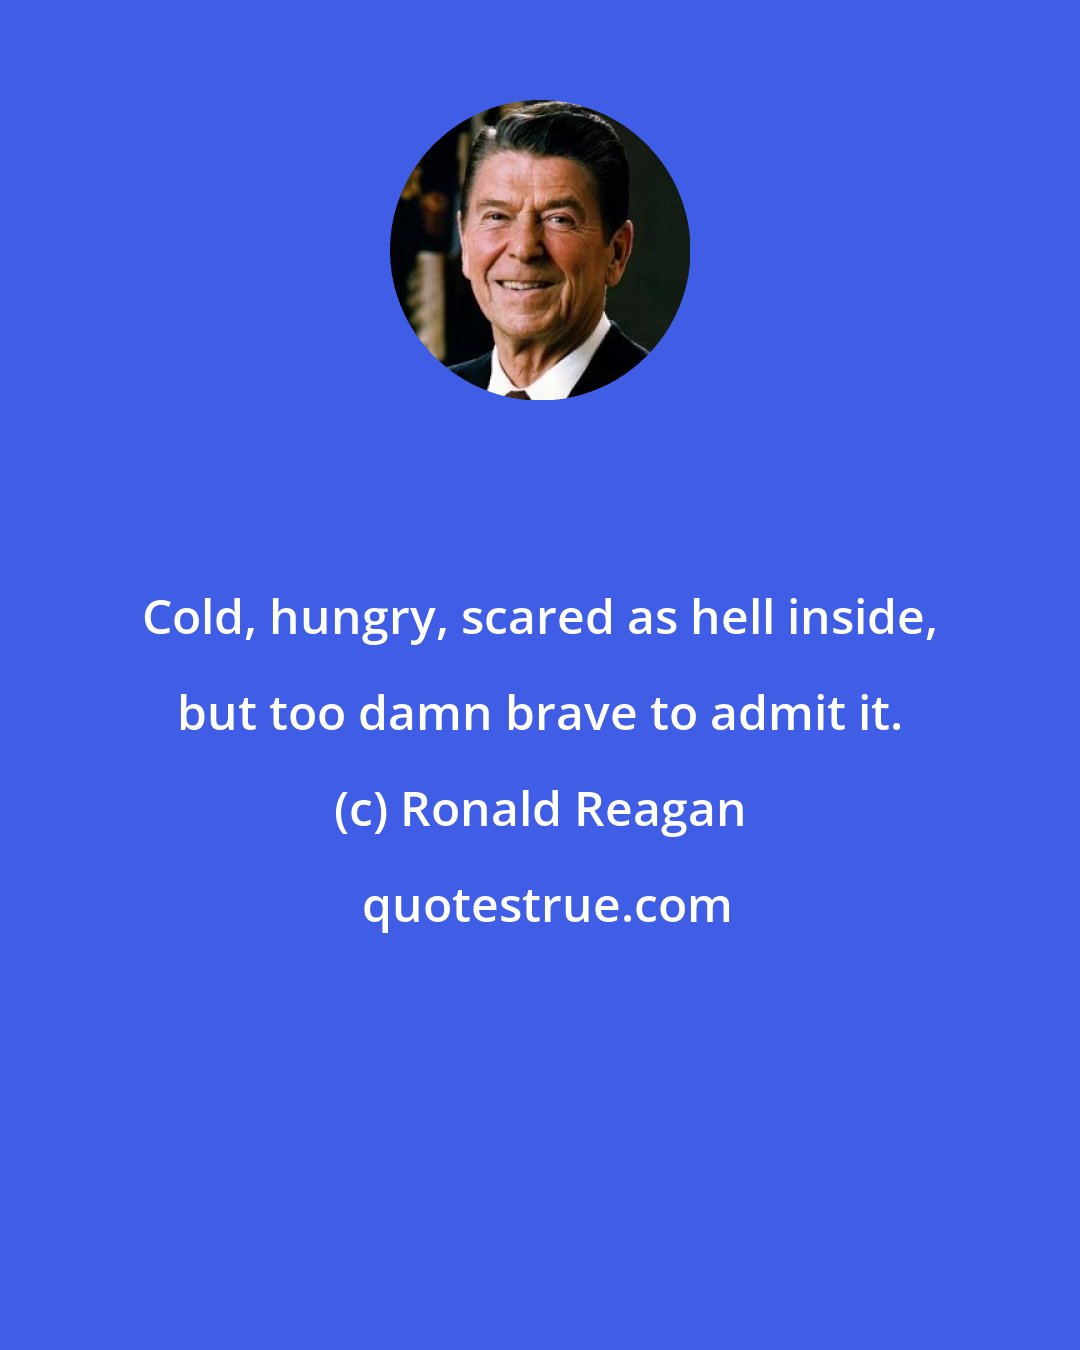 Ronald Reagan: Cold, hungry, scared as hell inside, but too damn brave to admit it.